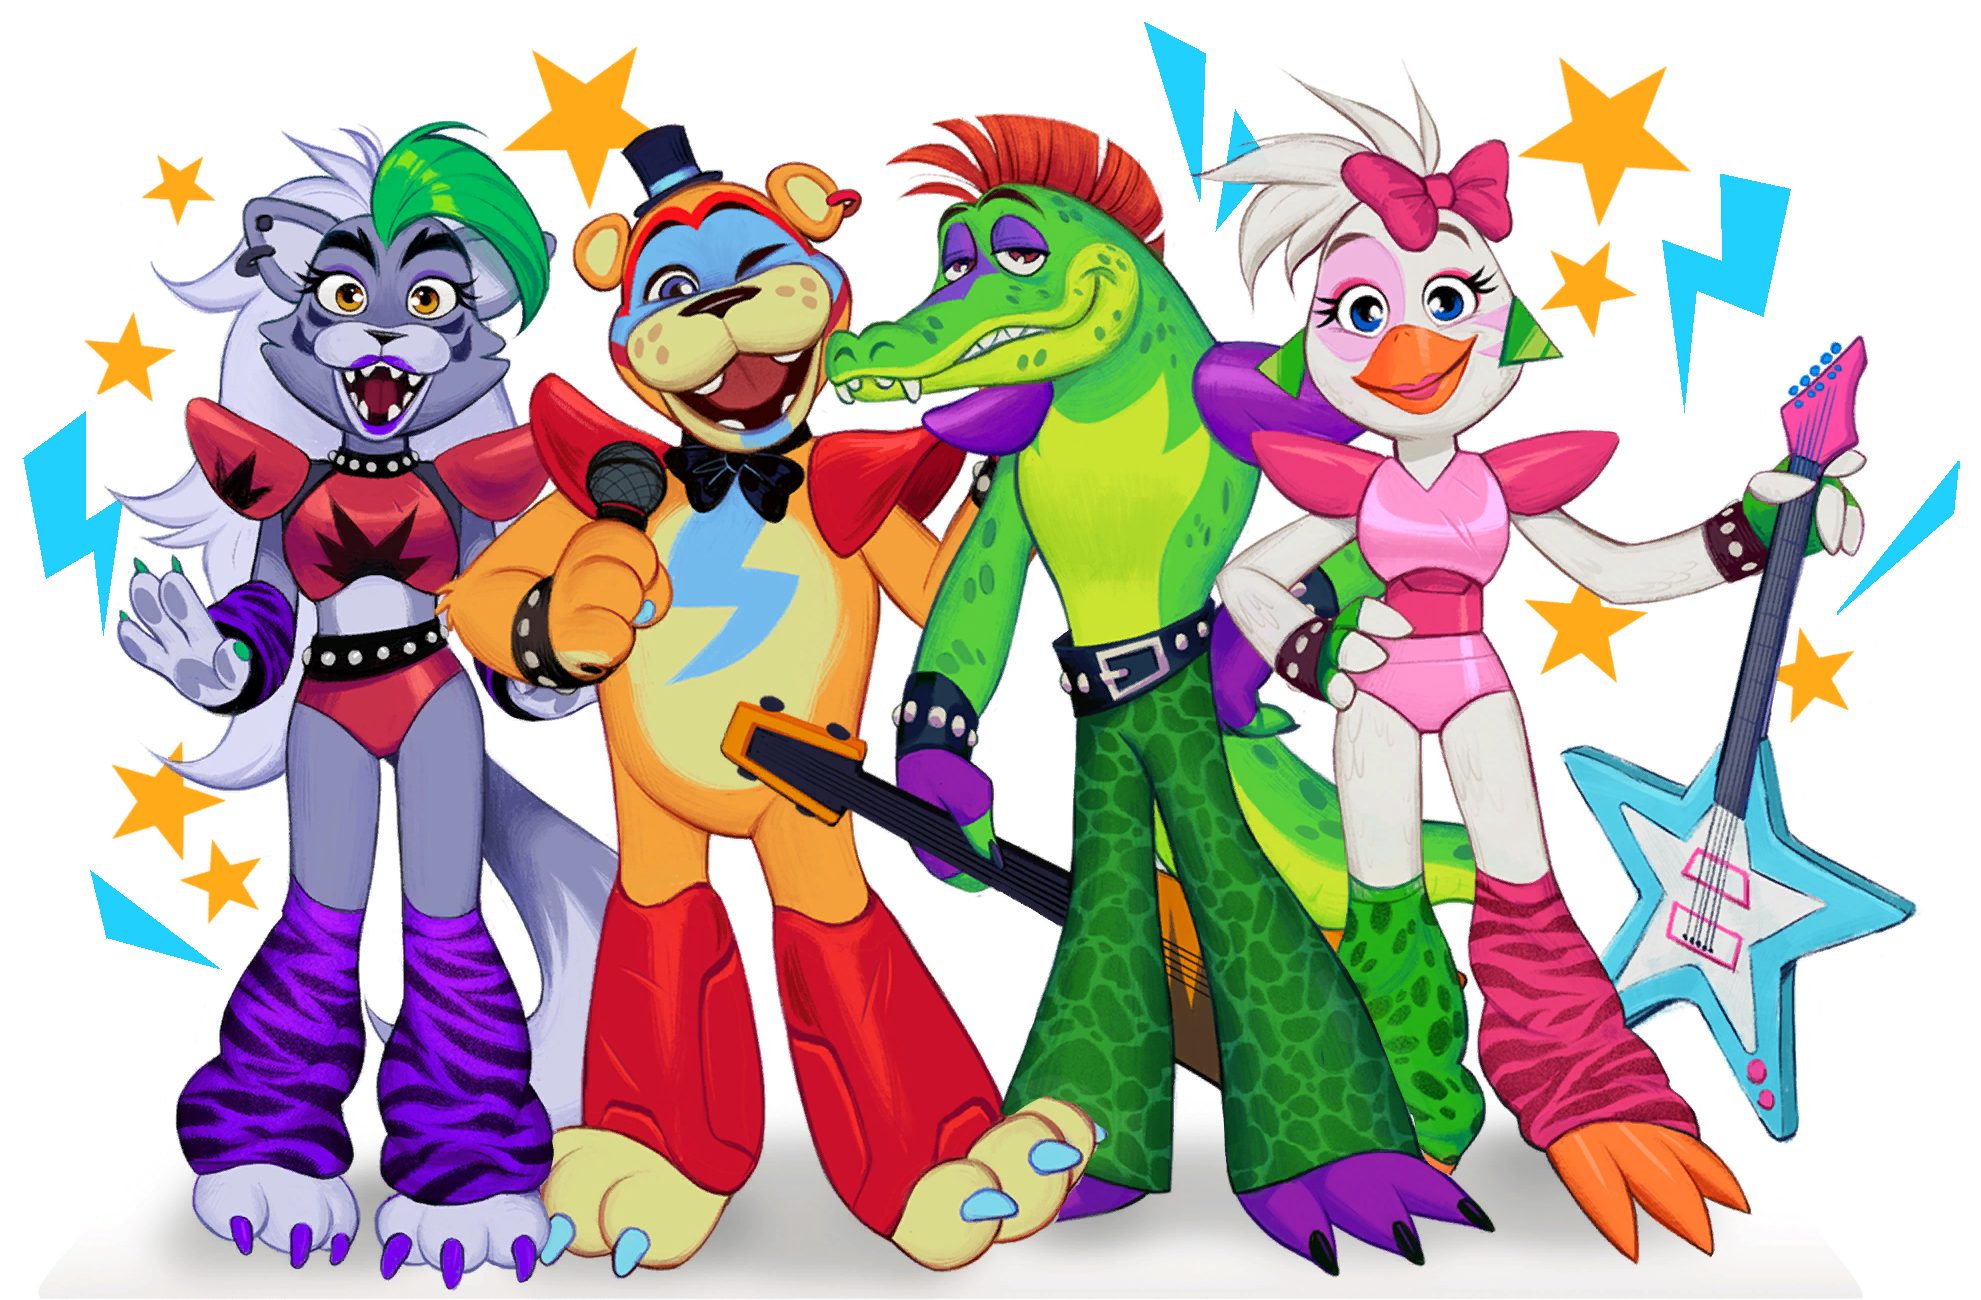 CAN GLAMROCK FREDDY AND THE ANIMATRONICS SAVE FRIENDS FROM THE